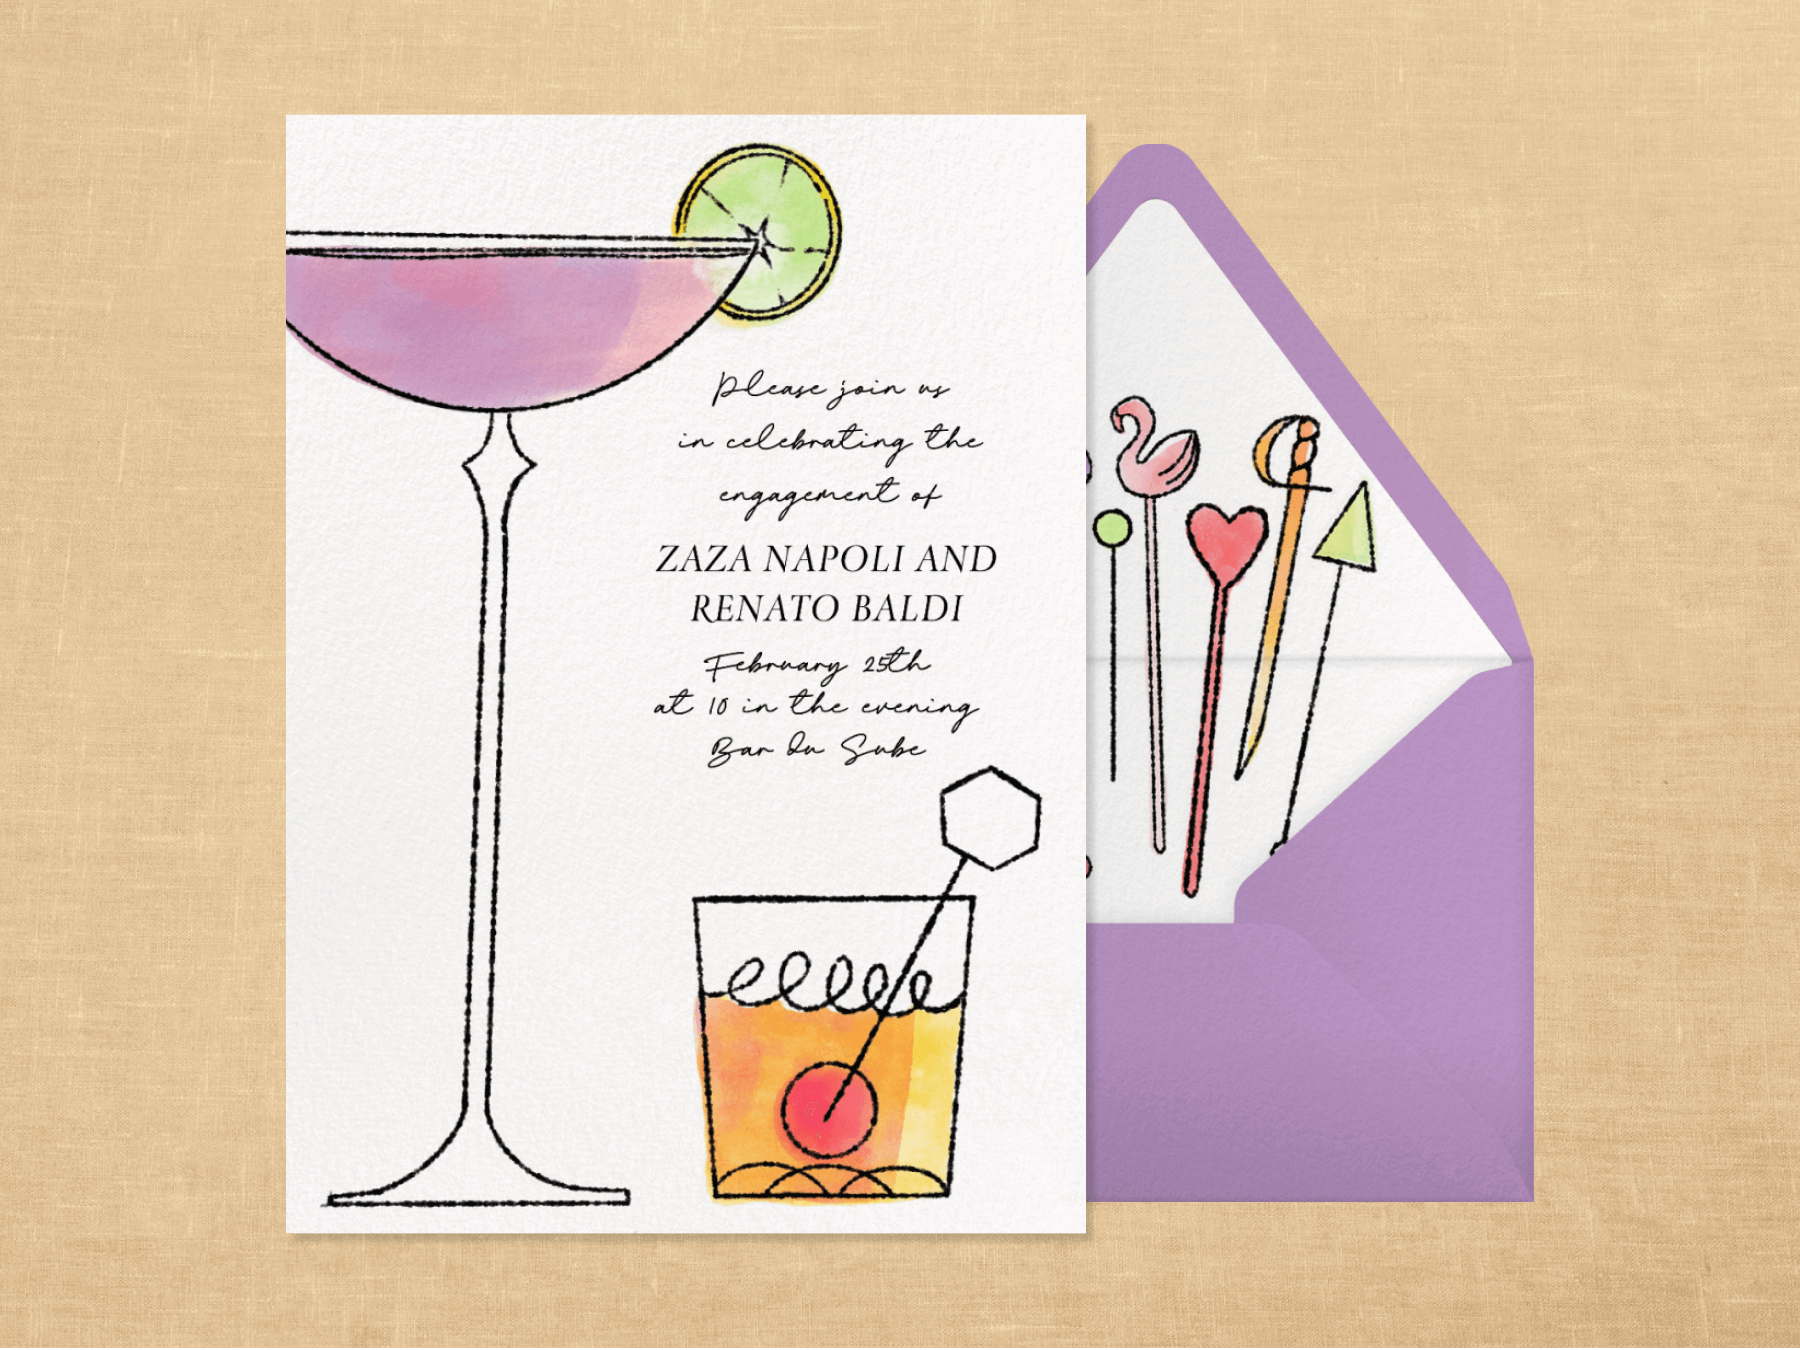 A cocktail-themed engagement party invitation with a matching envelope.